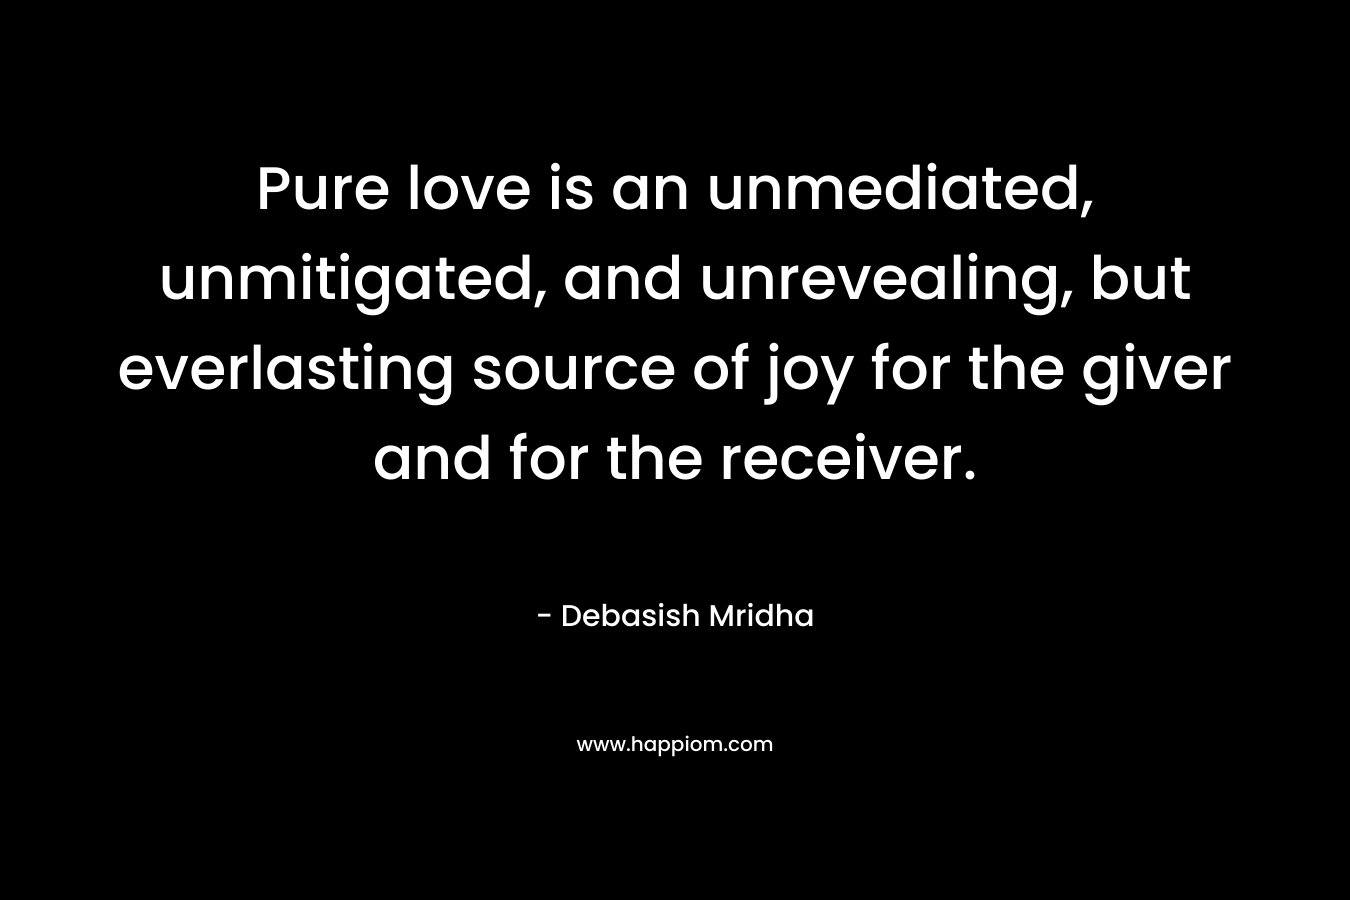 Pure love is an unmediated, unmitigated, and unrevealing, but everlasting source of joy for the giver and for the receiver. – Debasish Mridha